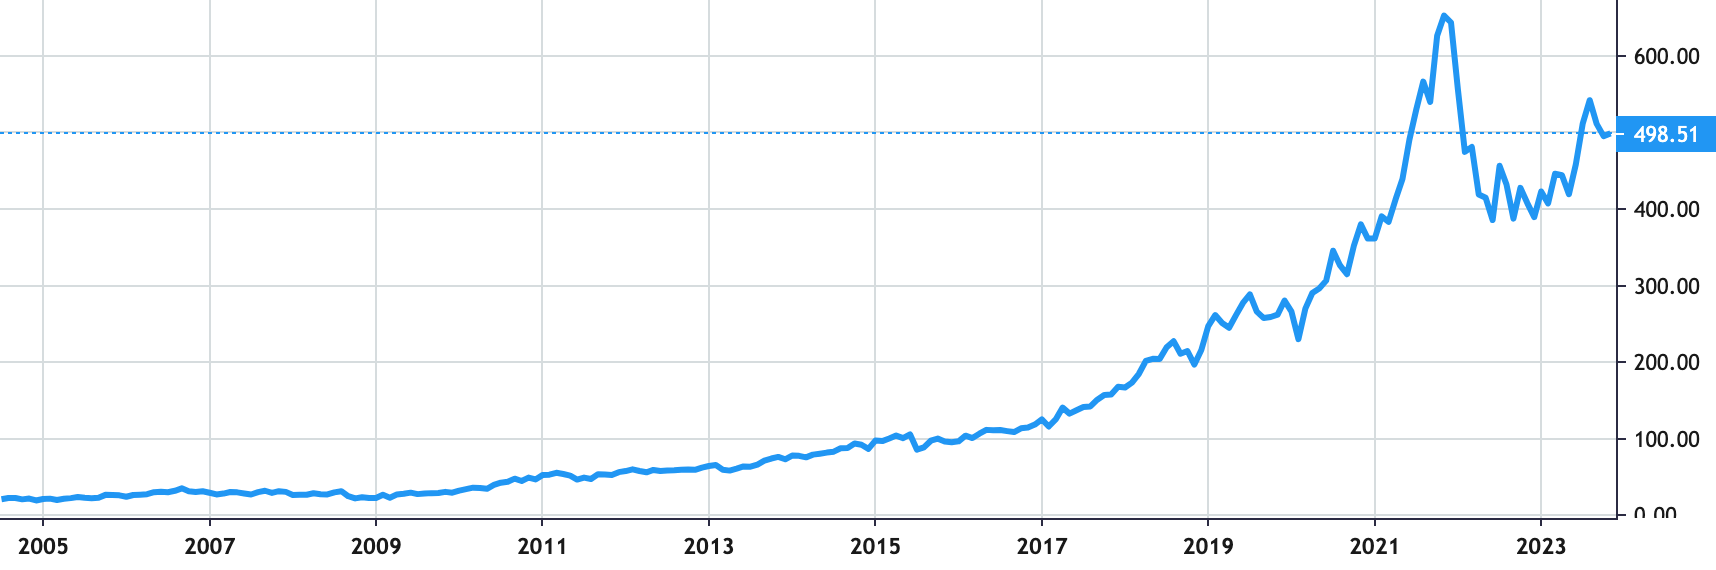 Intuit Inc share price history